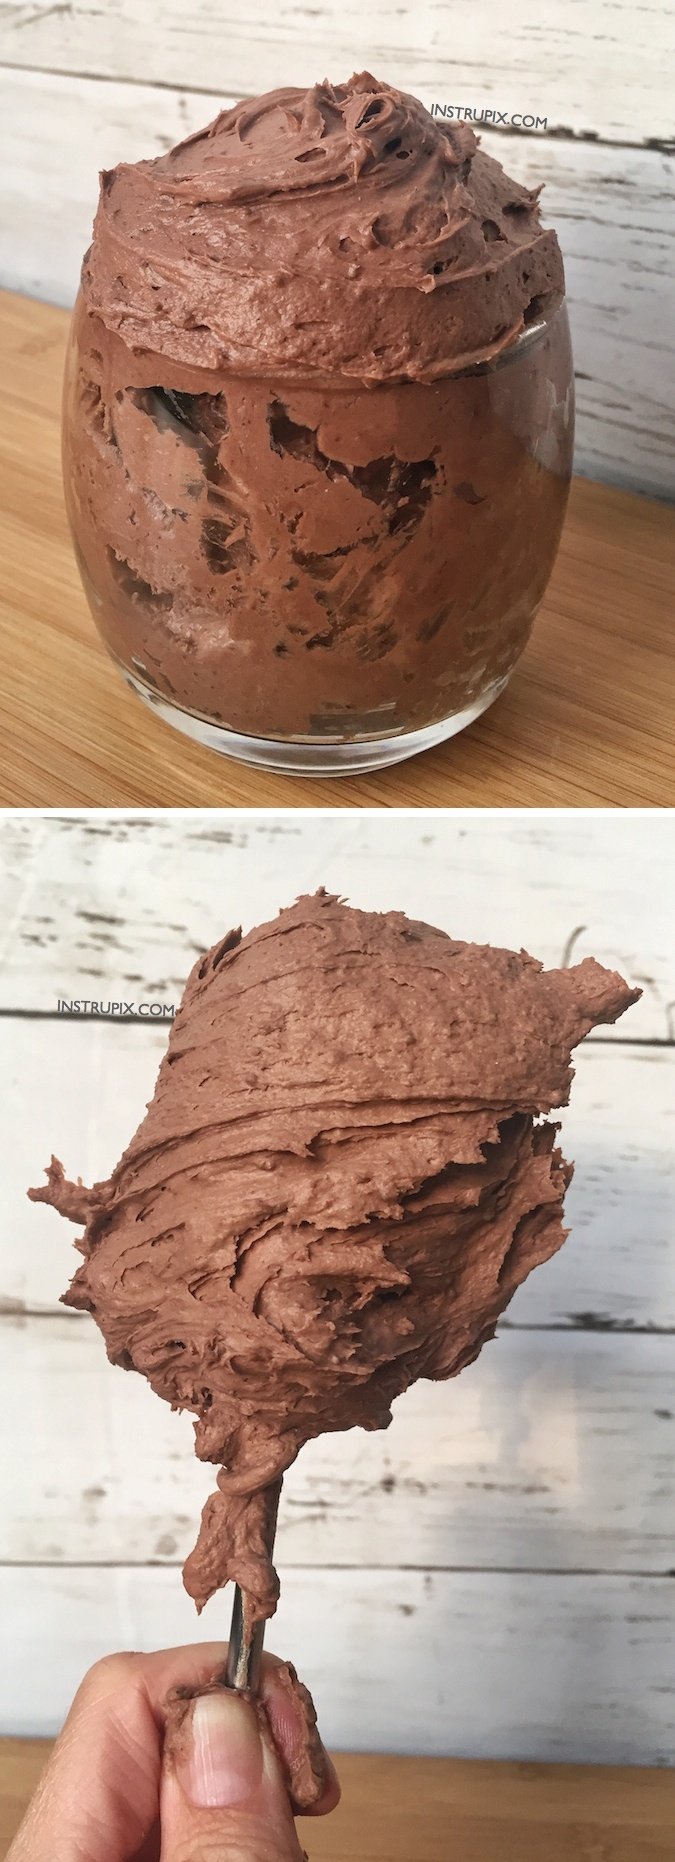 Easy mousse recipe using just 2 simple ingredients! Make it in any flavor that you would like (chocolate, lemon, cookies n' cream), it's so rich and delicious! It's the easiest, quickest dessert you will ever make. Also good as a pie filling, icing on a cake, or as a dip for fruit and cookies. Instrupix.com